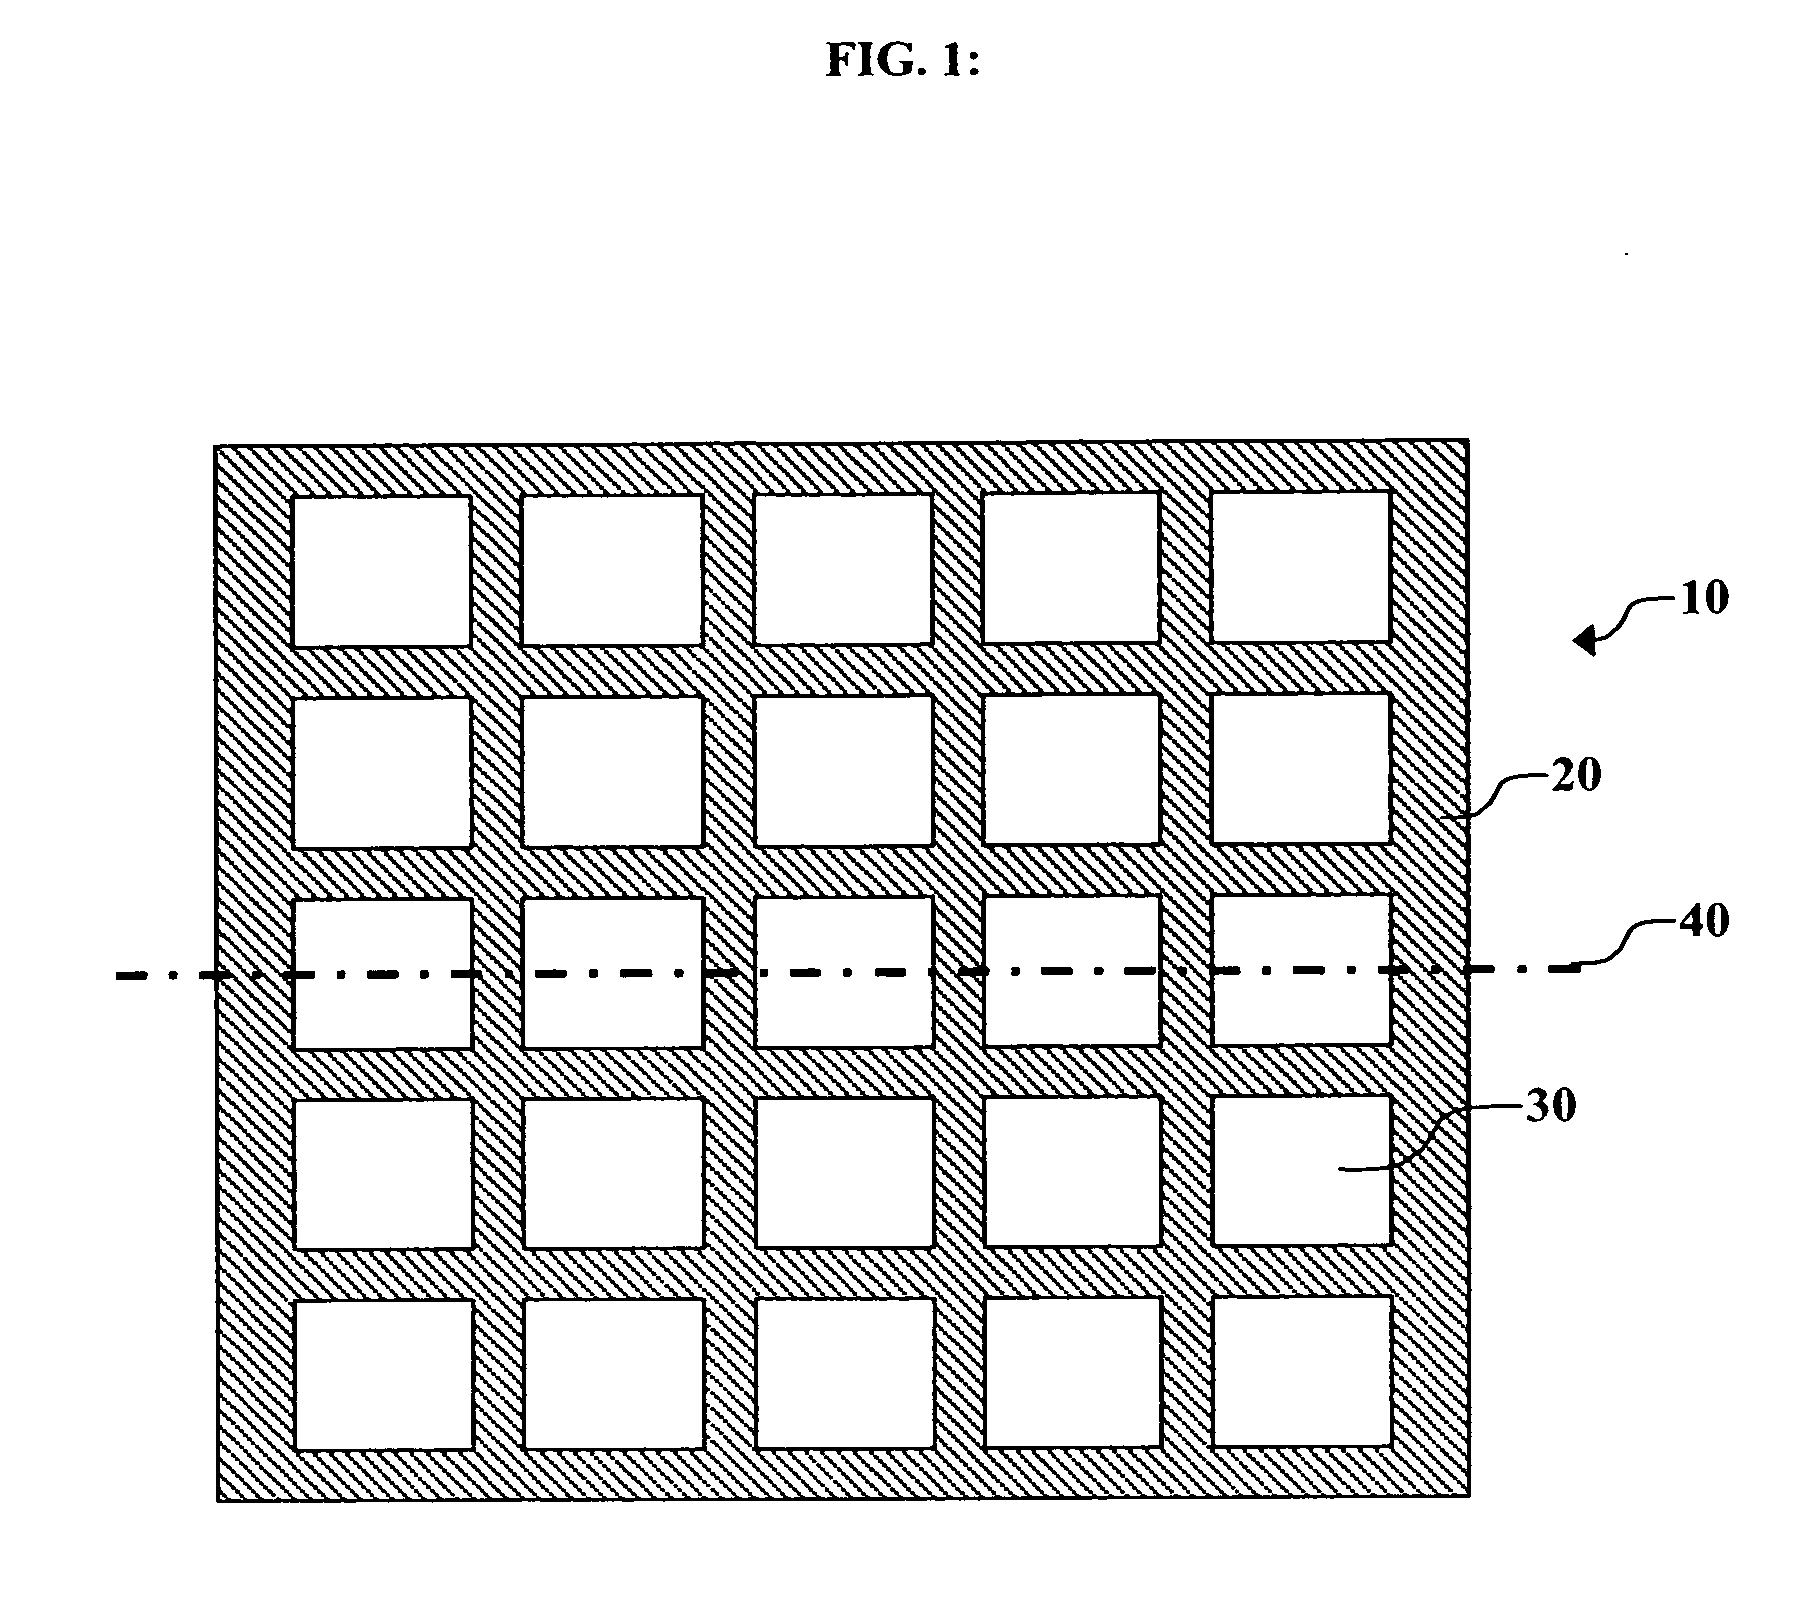 Patterning OLED device electrodes and optical material